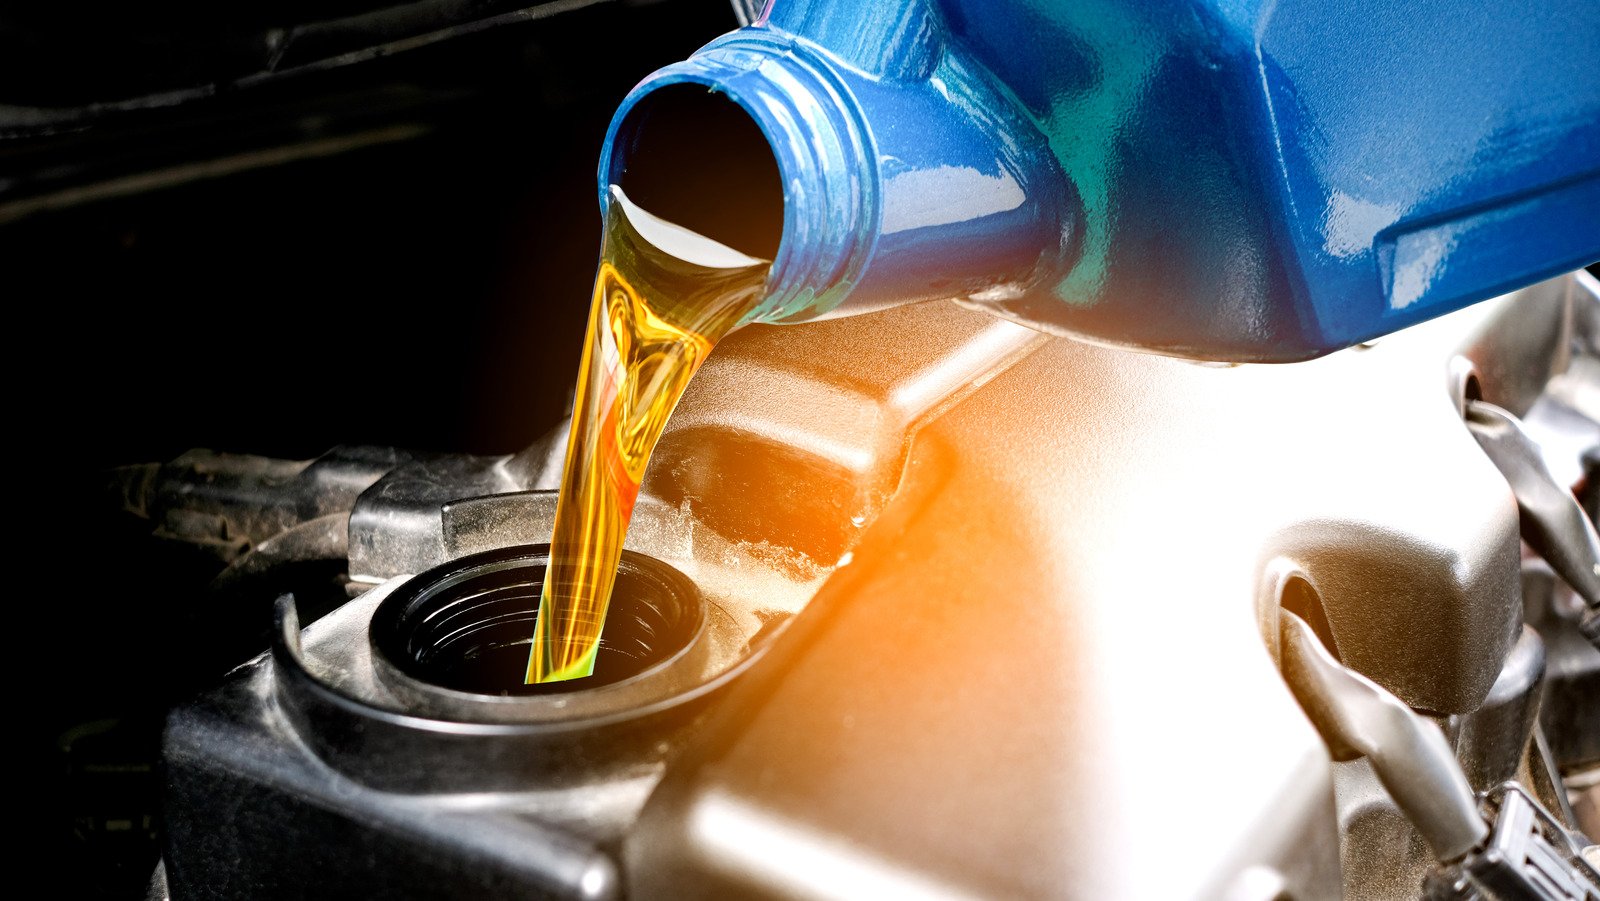 The Most Popular Diesel Oil Brands Ranked Worst To Best